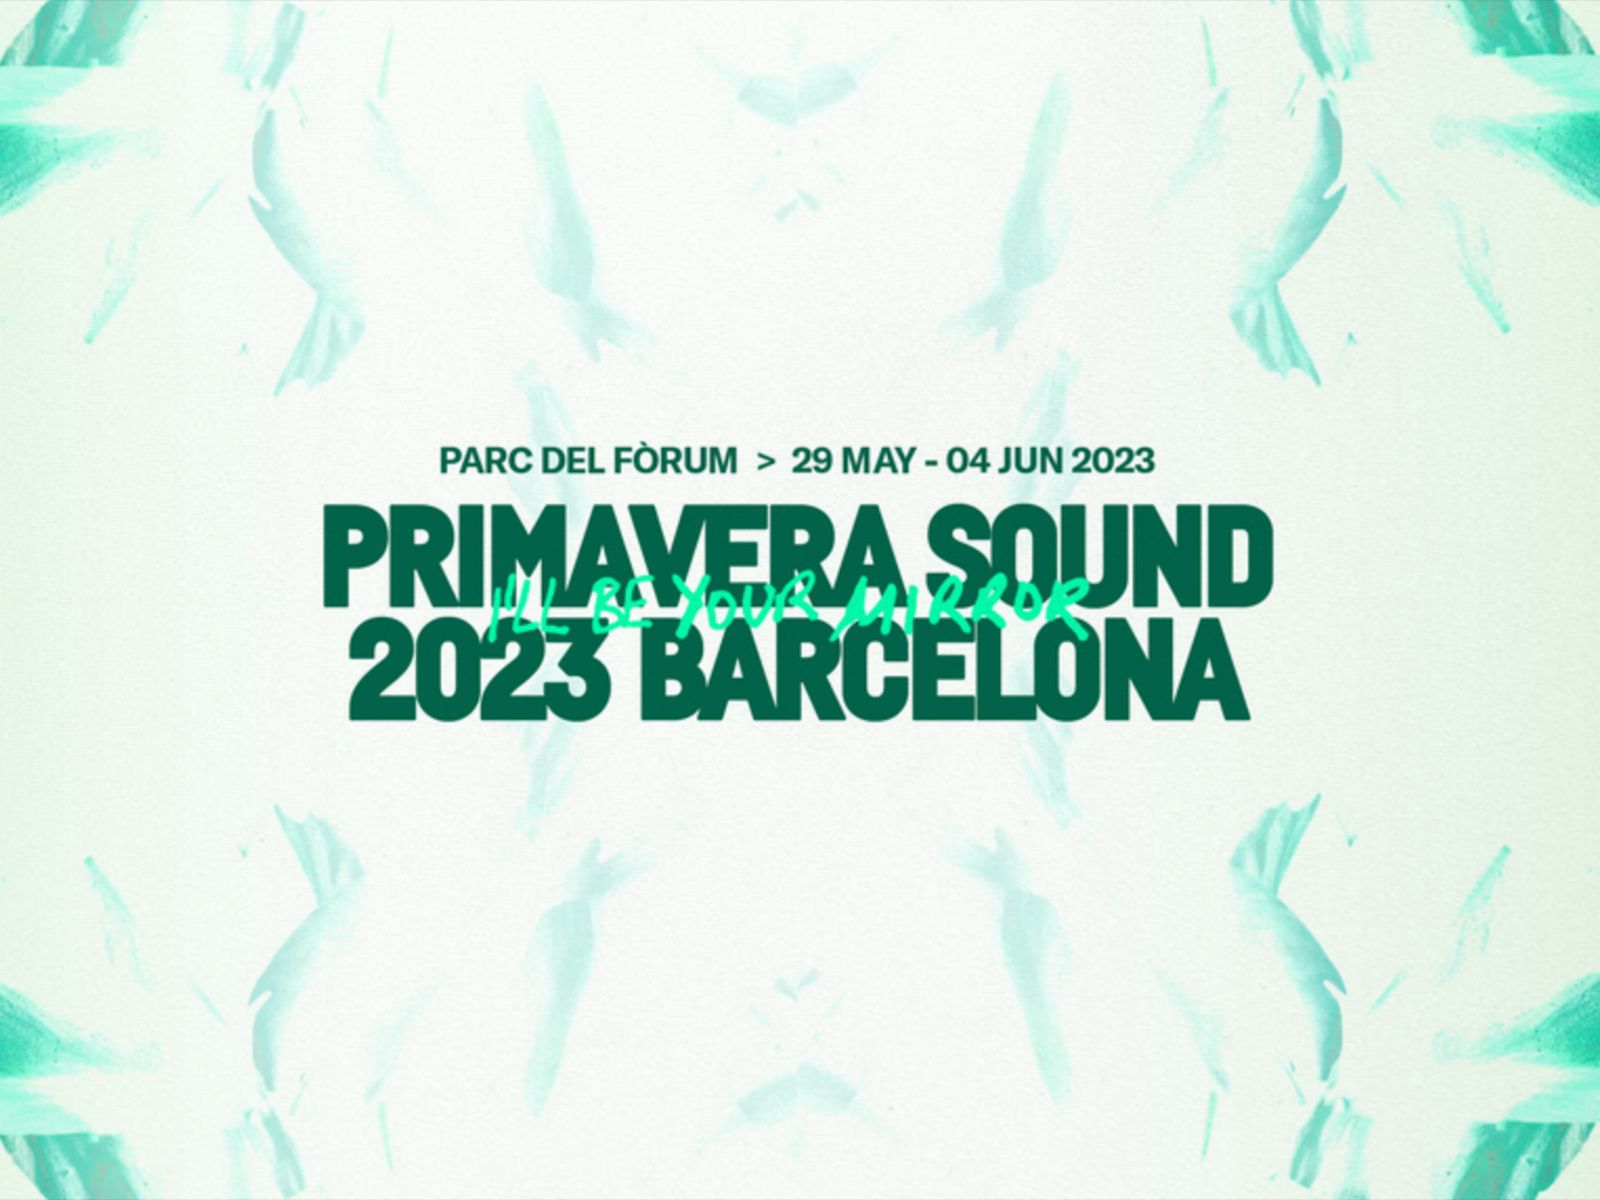 Primavera Sound updates its line-up for Barcelona and Madrid